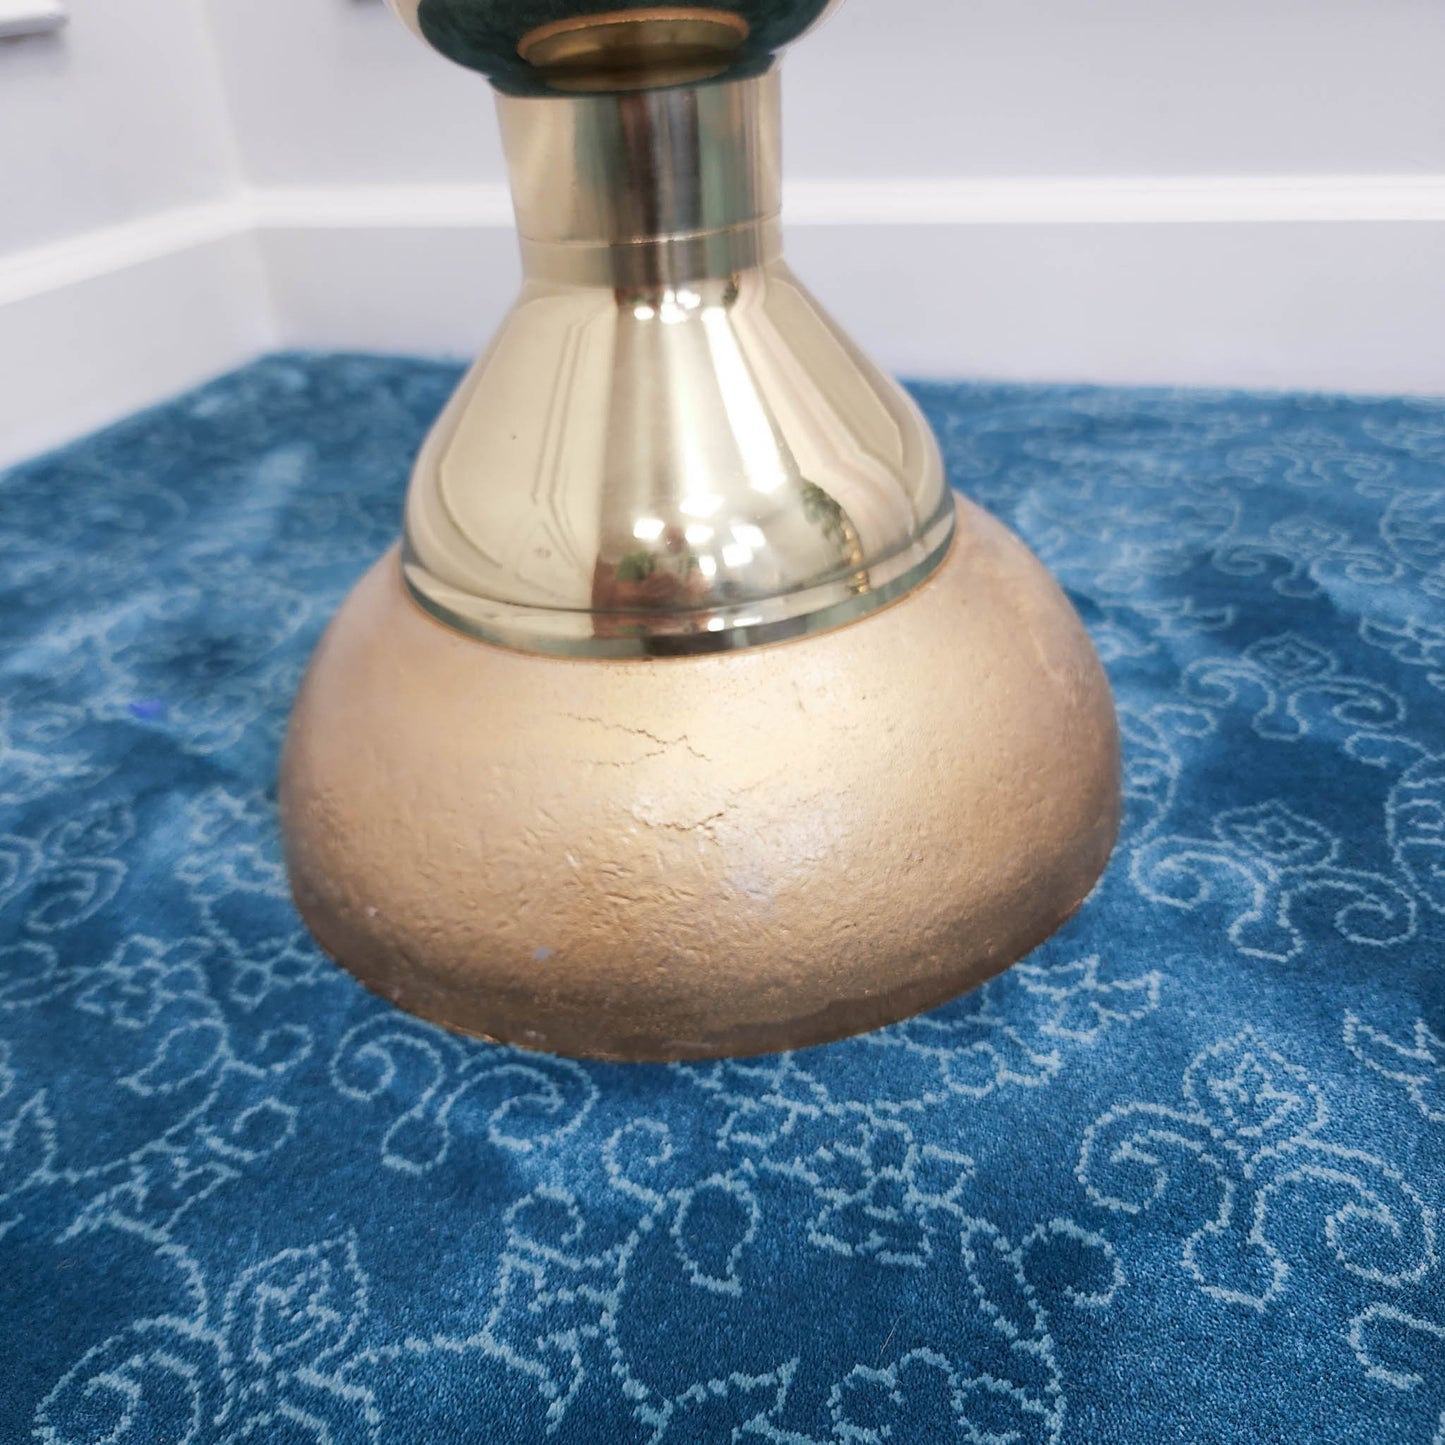 Hilal Alem Finial %100 Brass for Real Mosque Domes